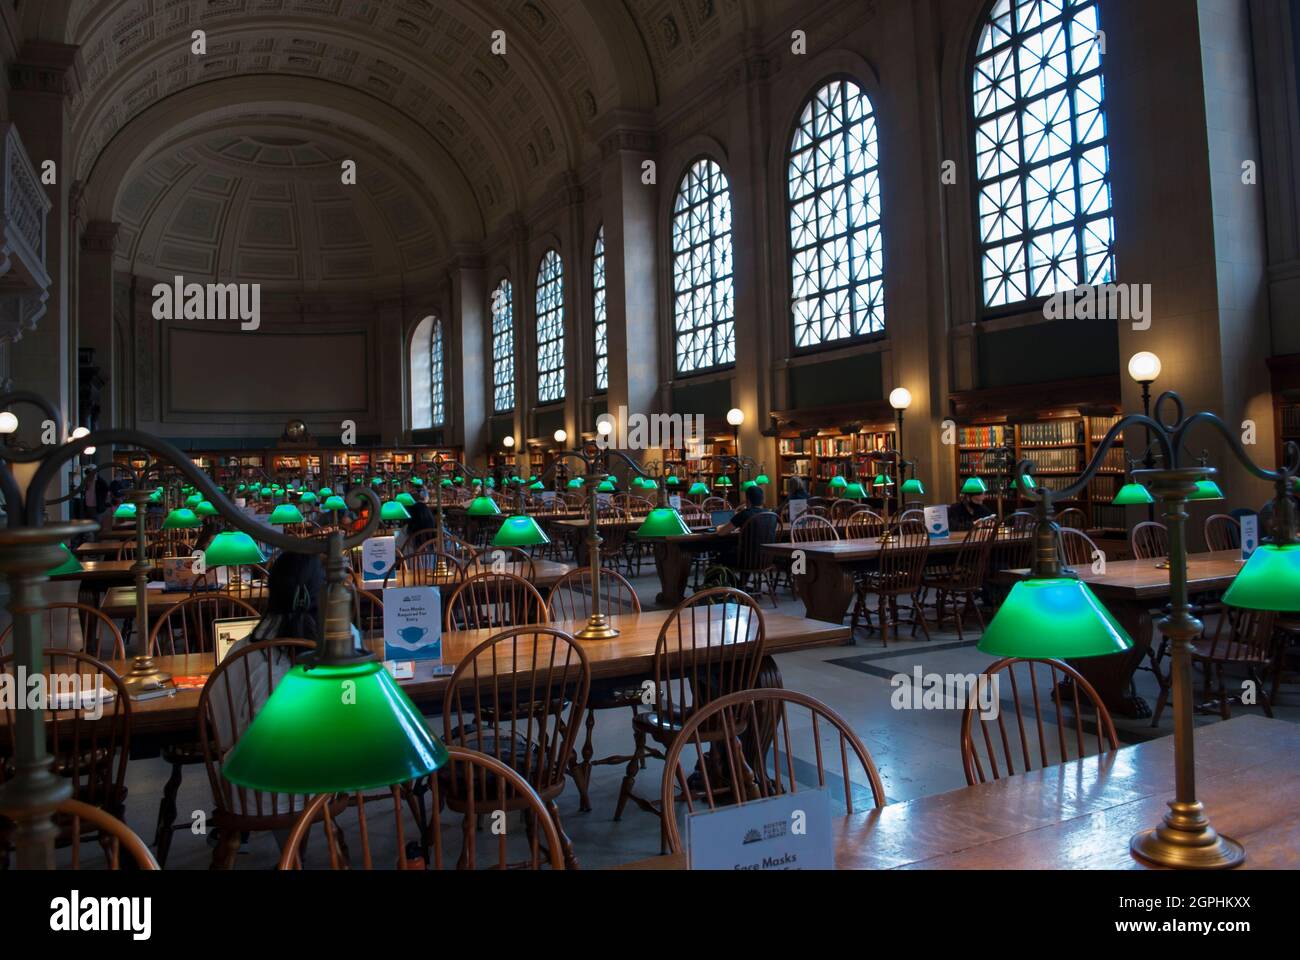 Historical library interior. People are reading Stock Photo